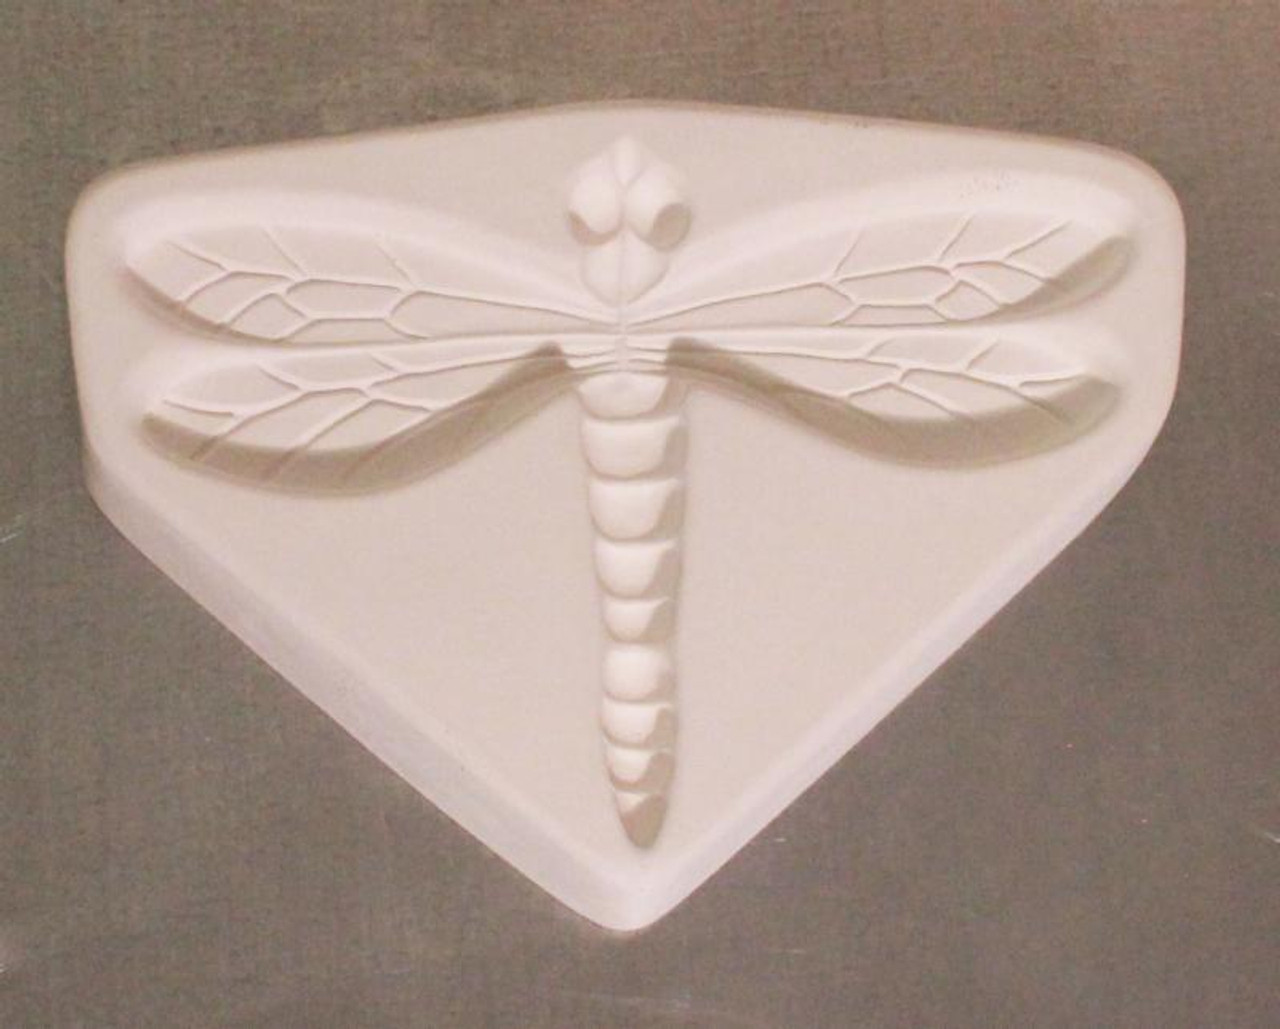 LF114 SMALL BUTTERFLY FRIT DAM MOLD